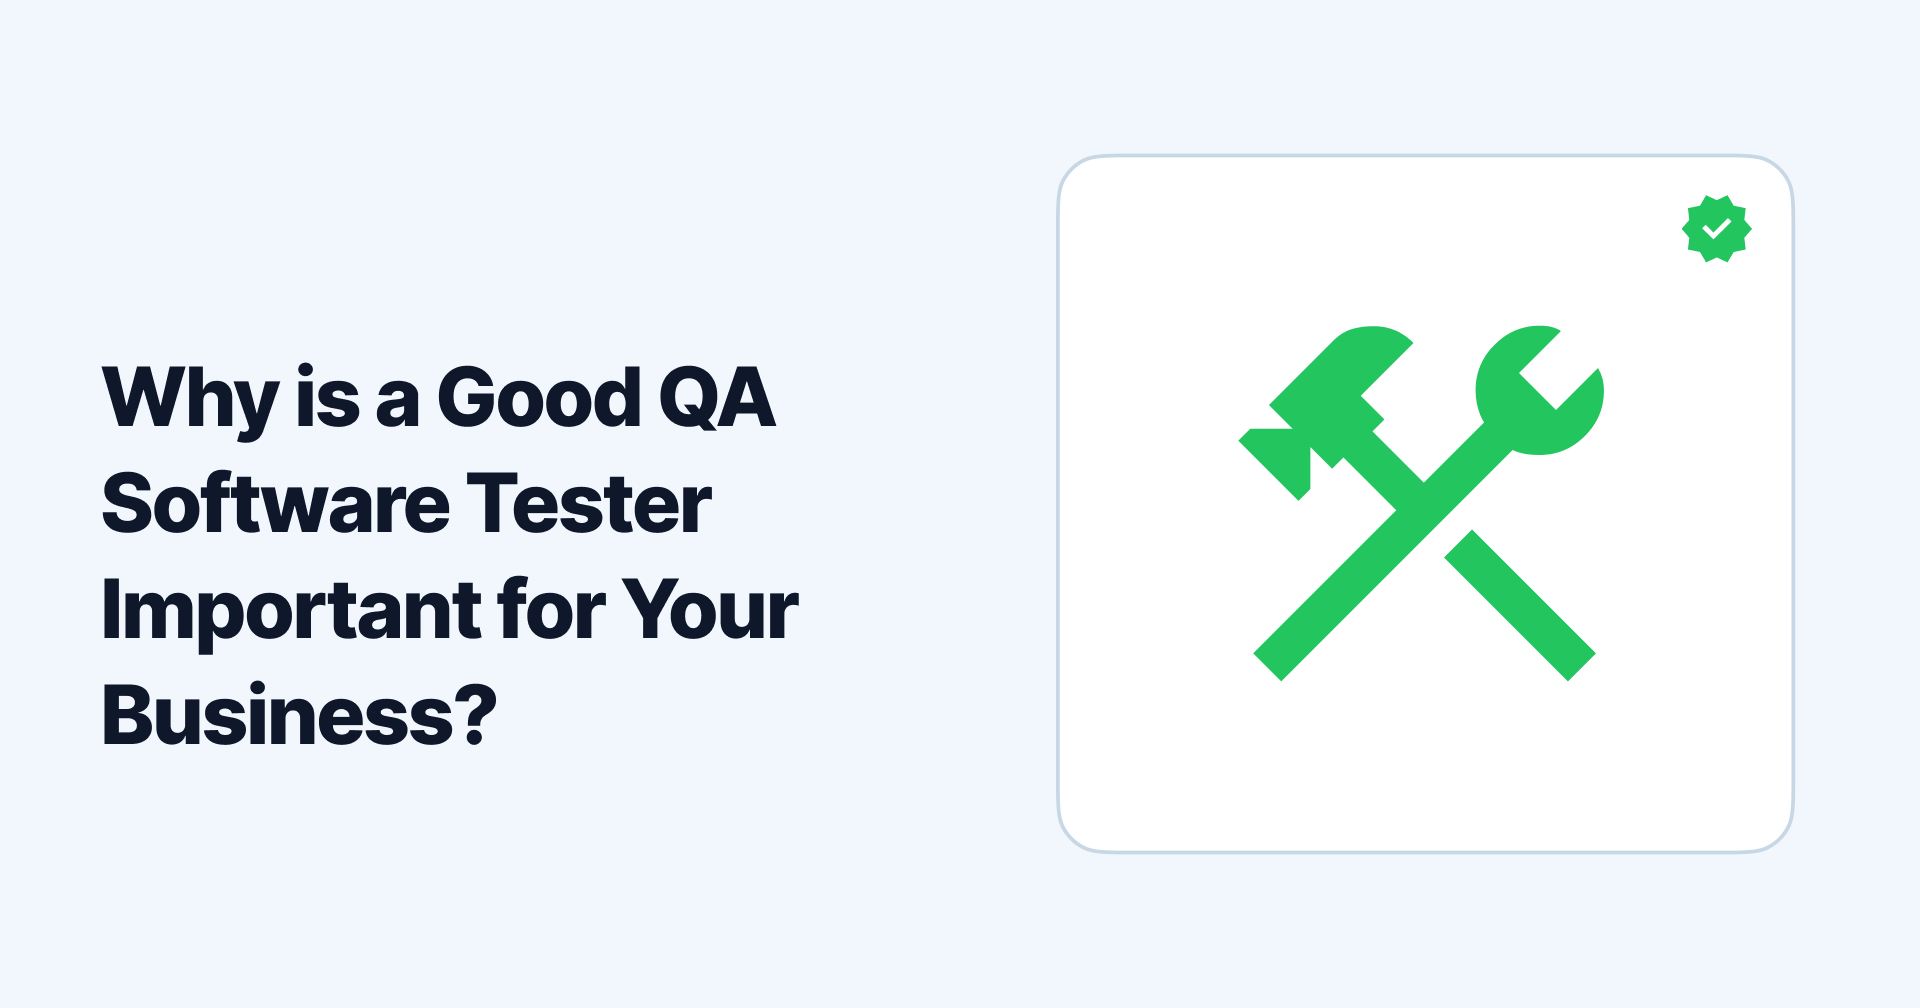 Why is a Good QA Software Tester Important for Your Business?